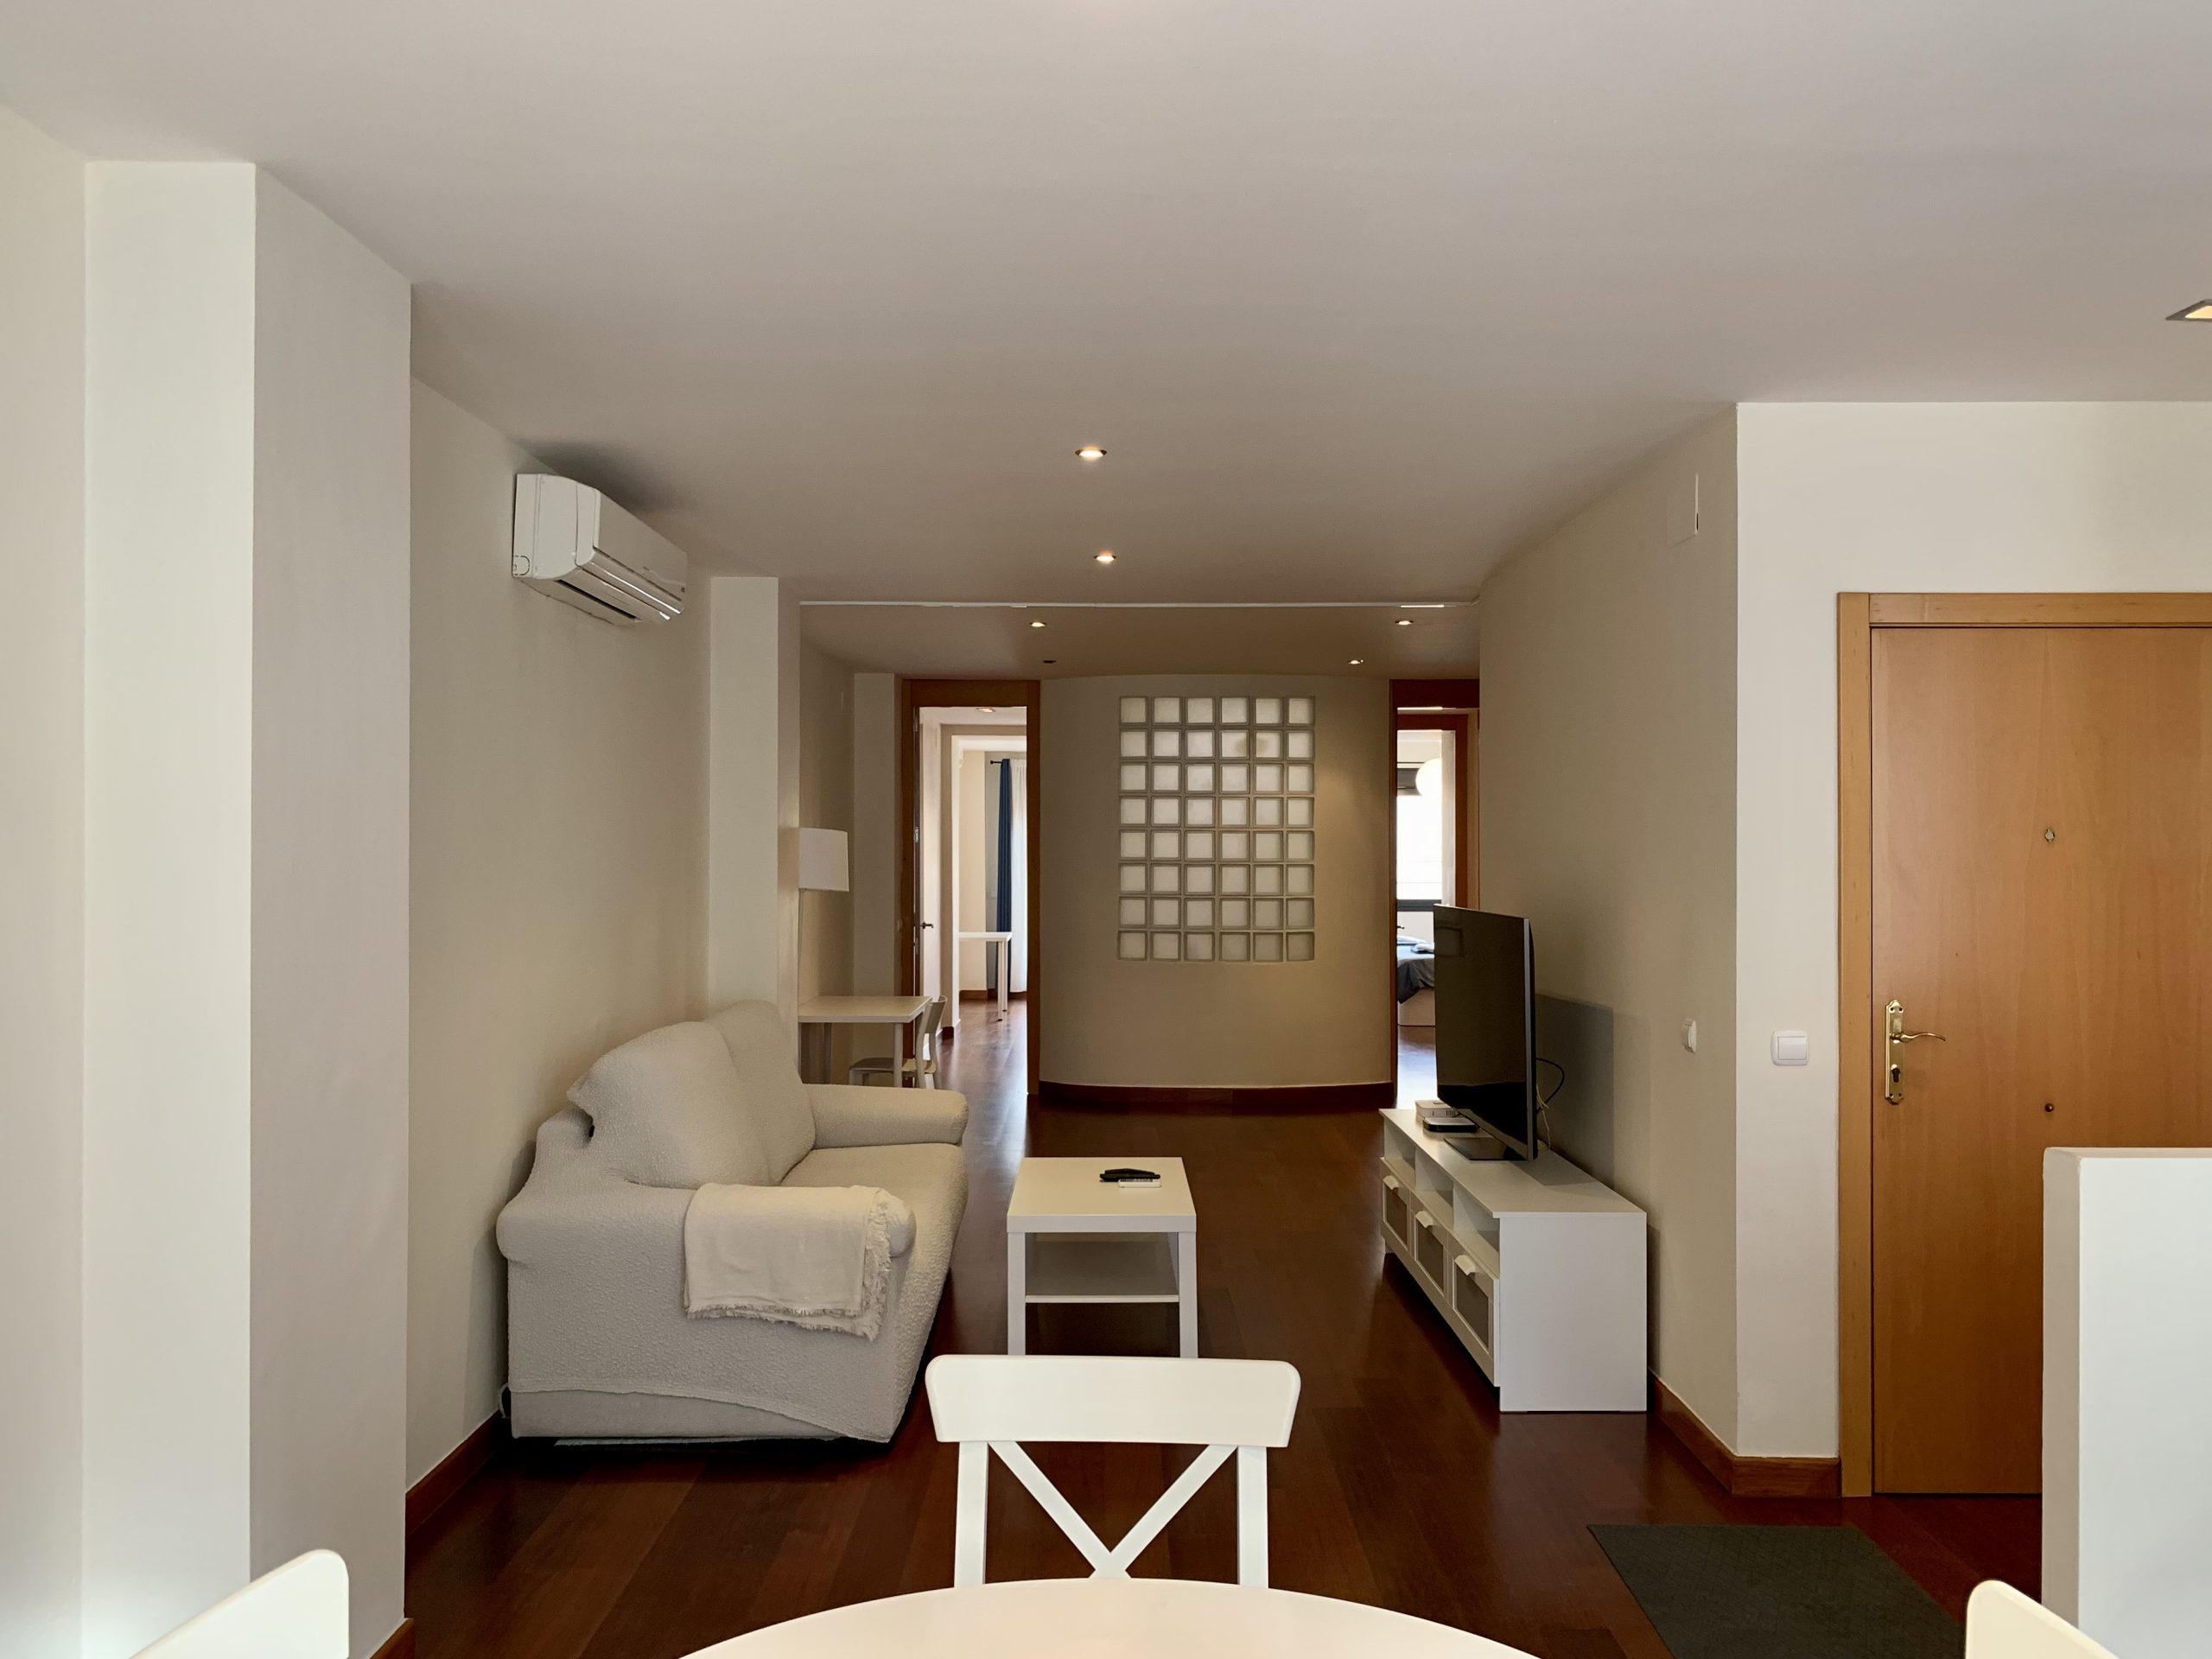 Literat 20 - Entry-ready apartment for rent in Valencia